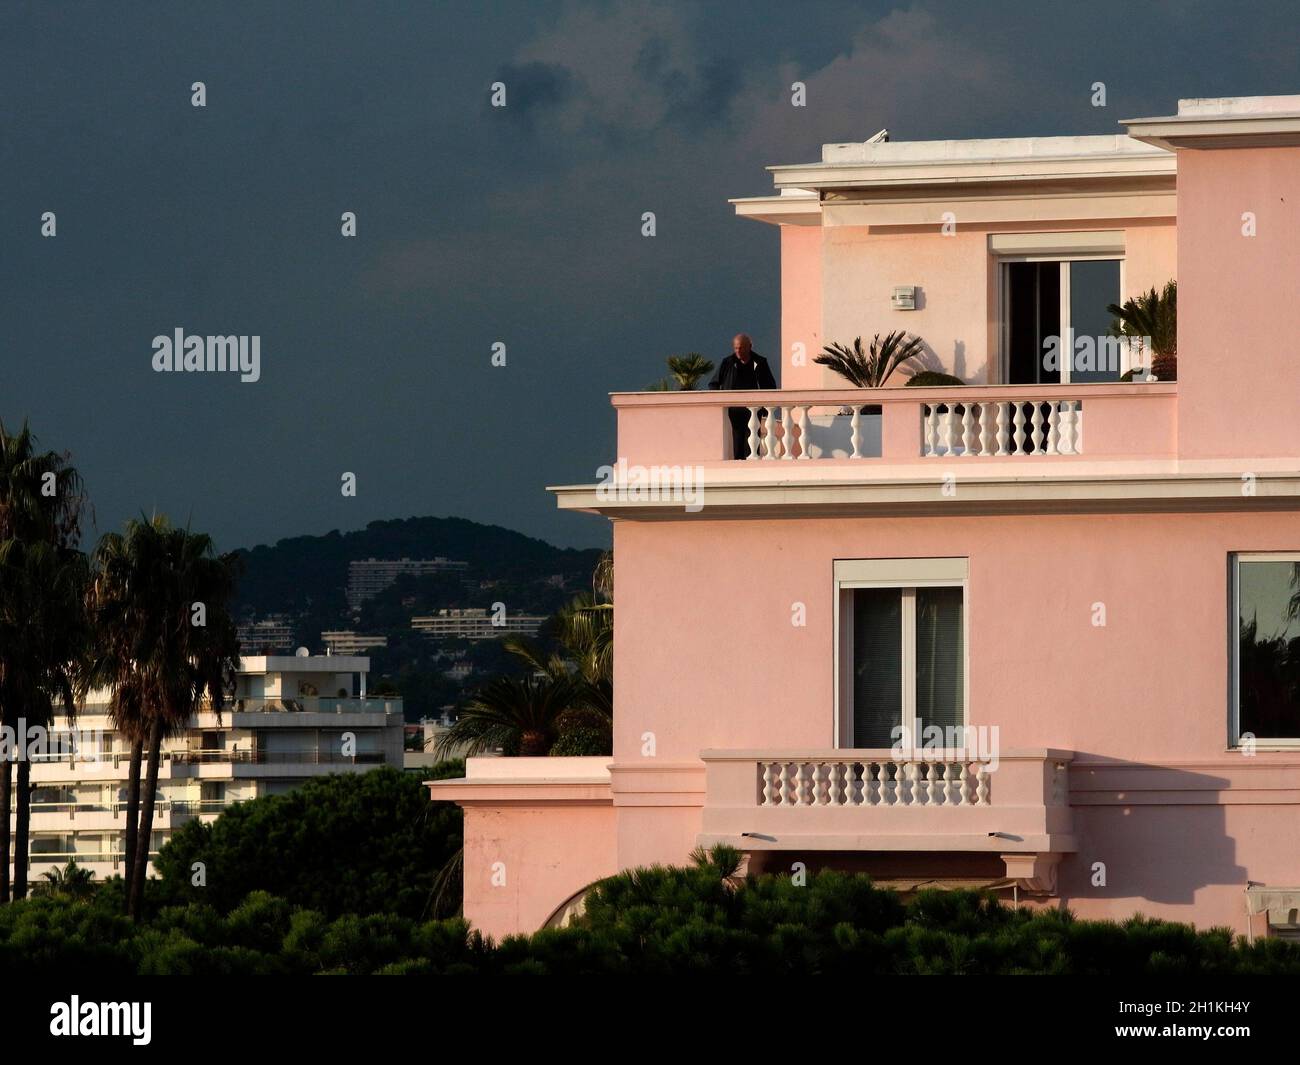 AJAXNETPHOTO. 2016. CANNES, FRANCE. - COTE D'AZUR RESORT - RESIDENTIAL PROPERTY GLOWS UNDER A SETTING SUN; OVERLOOKS BAY OF CANNES AND CROISETTE.PHOTO:JONATHAN EASTLAND/AJAX REF:GX163110 6591 Stock Photo